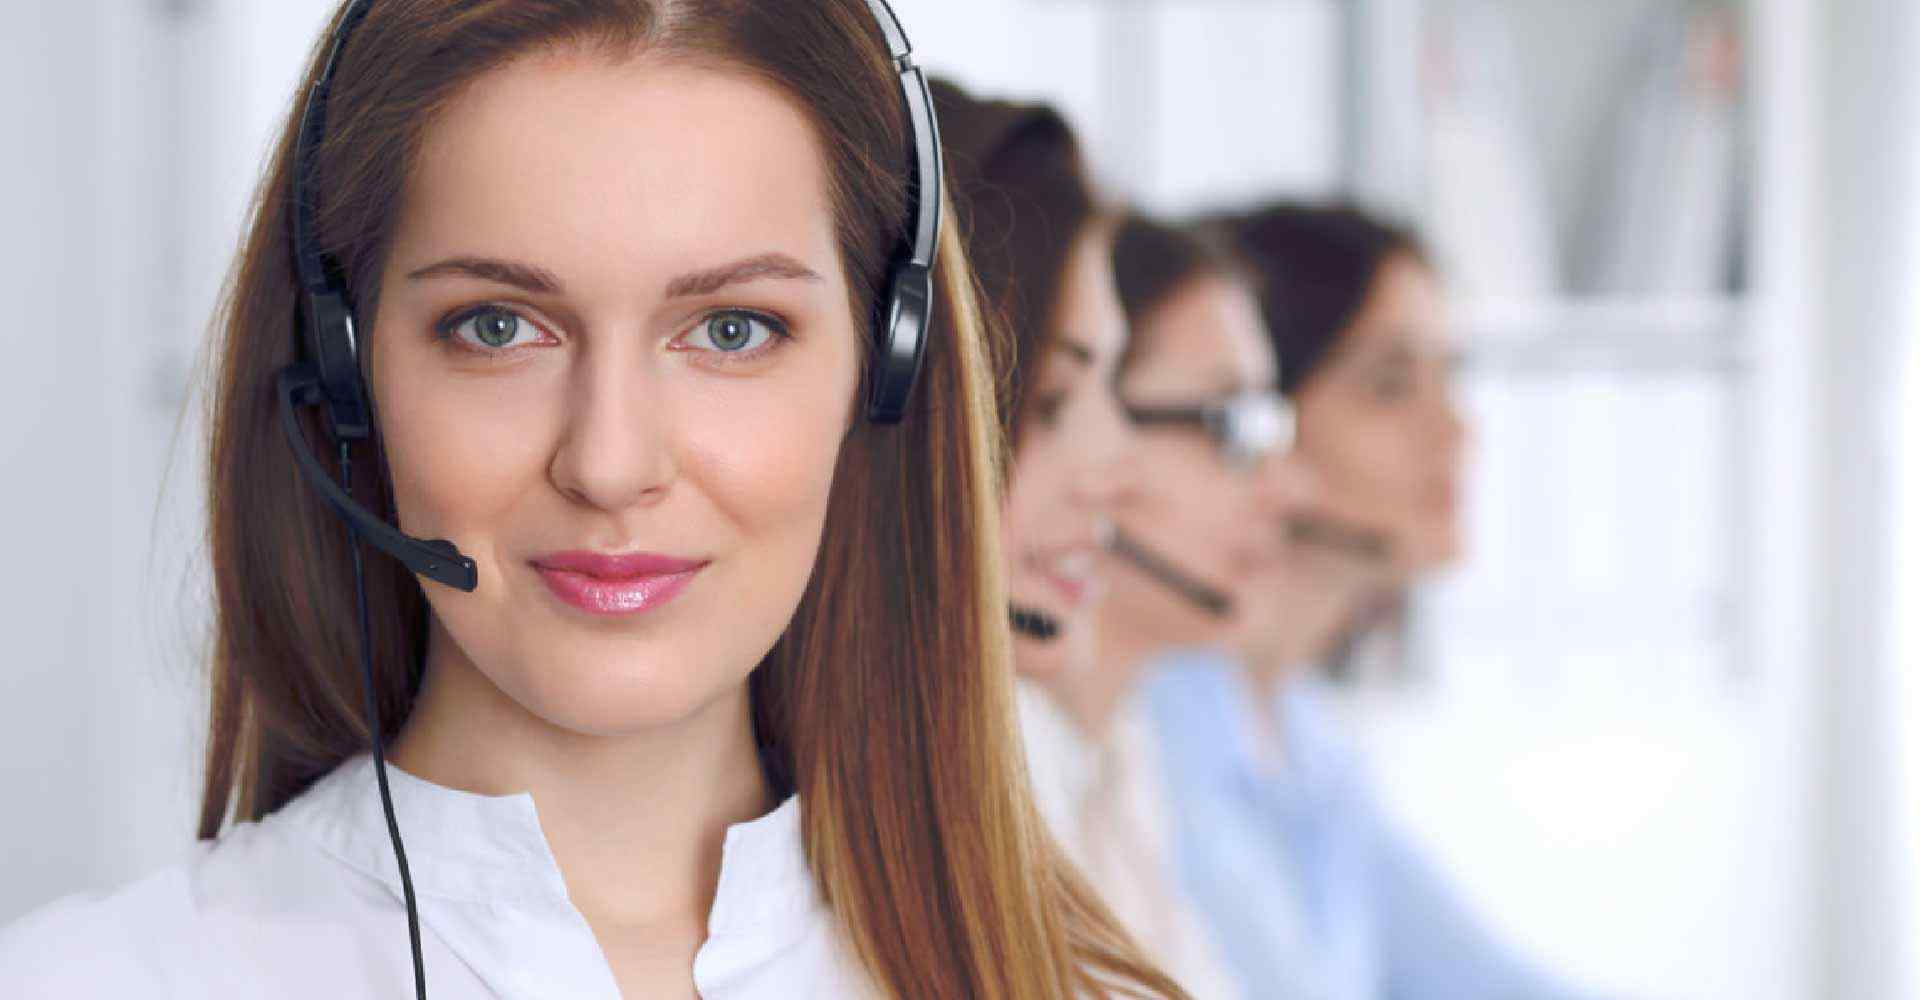 A female telephone answering service operator helping HVAC companies in taking phone calls